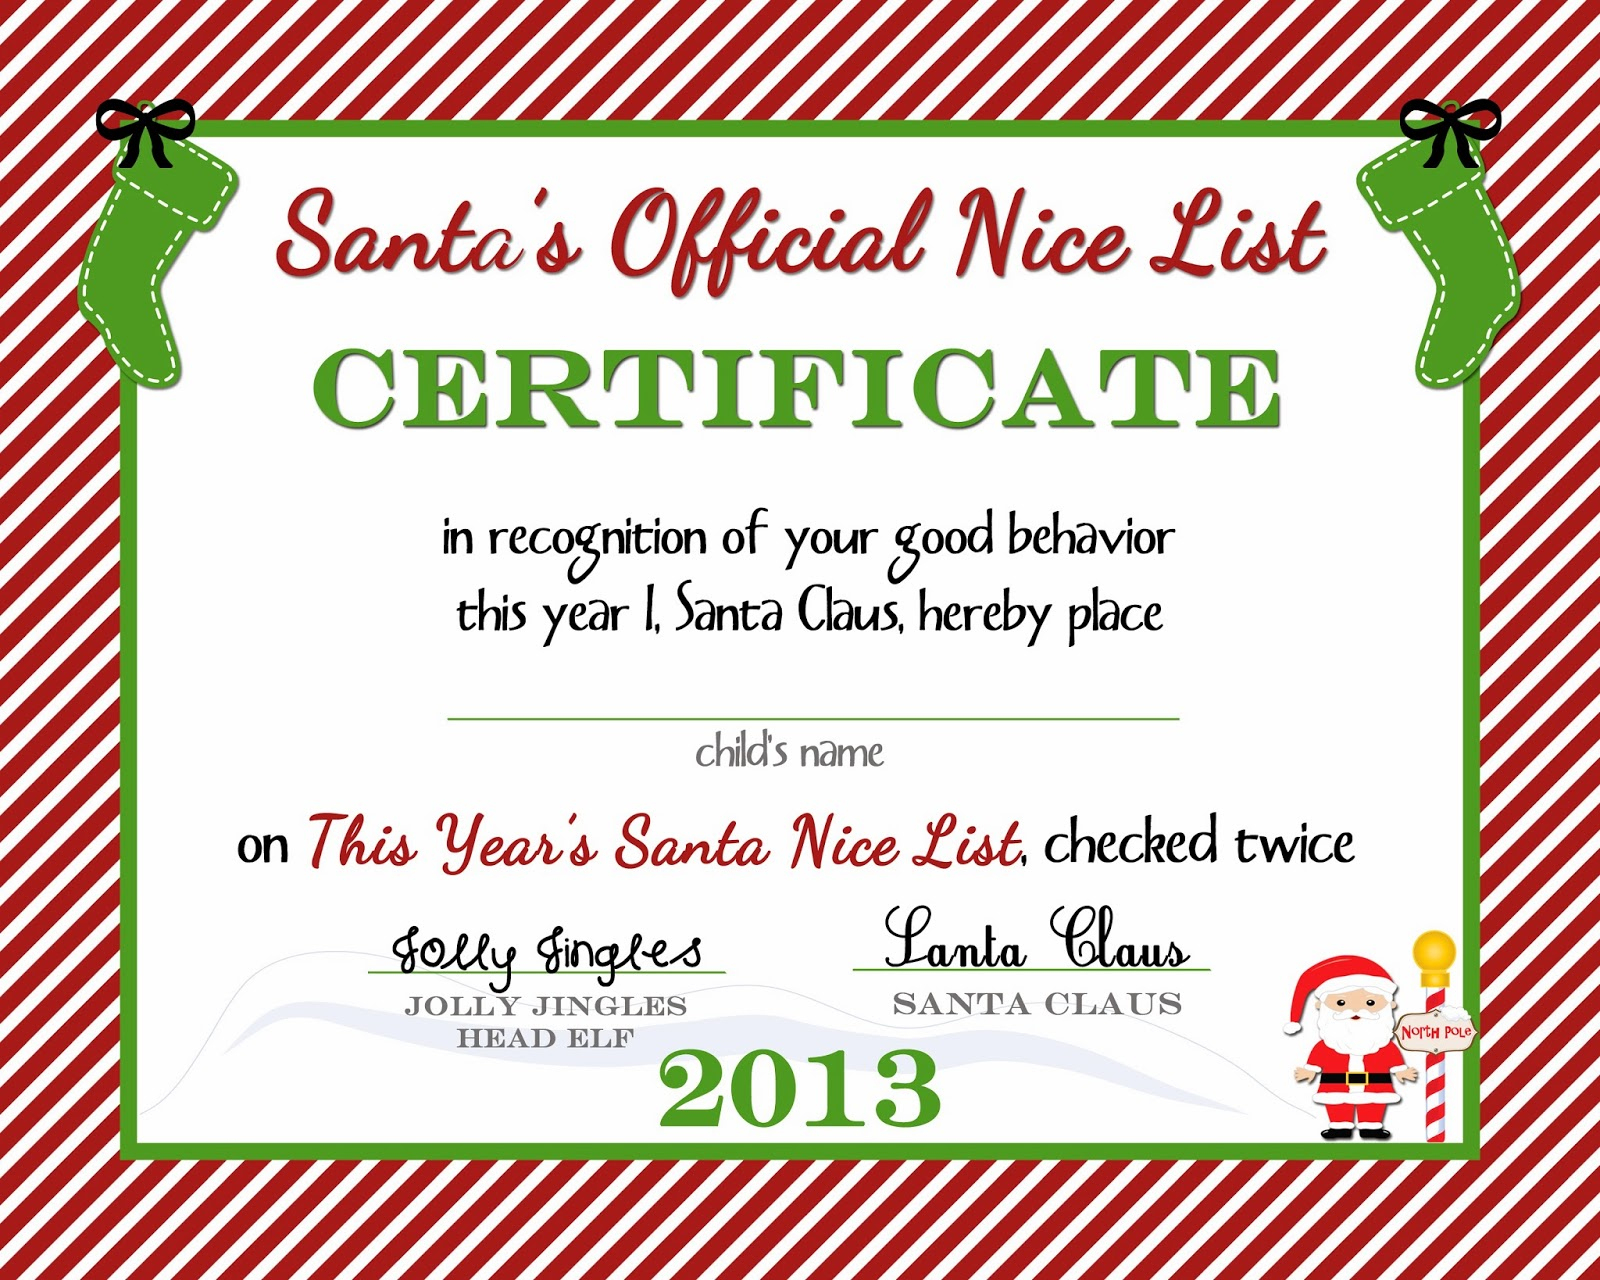 Free Printable) Nice List Certificate From The North Pole - A - Good Behaviour Certificates Free Printable